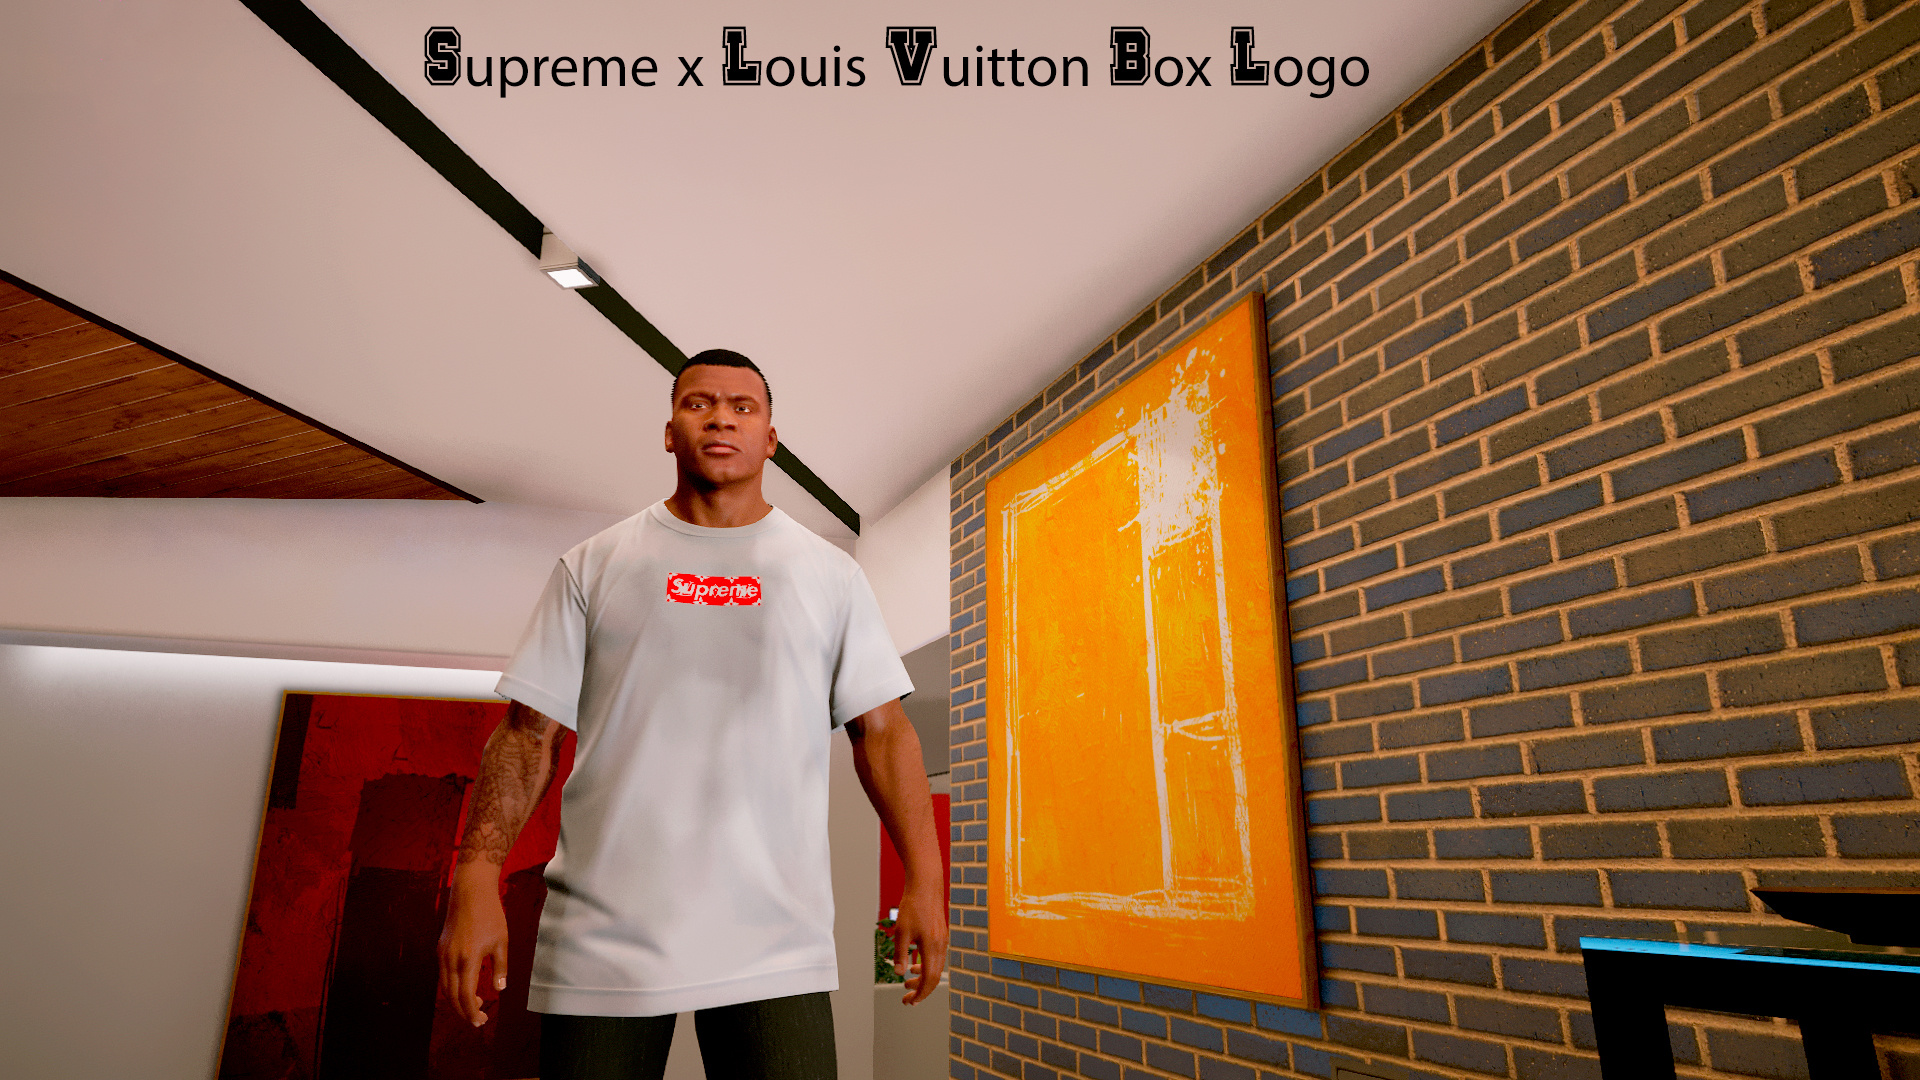 Where To Buy A Supreme Box Logo Louis Vuitton | Confederated Tribes of the Umatilla Indian ...